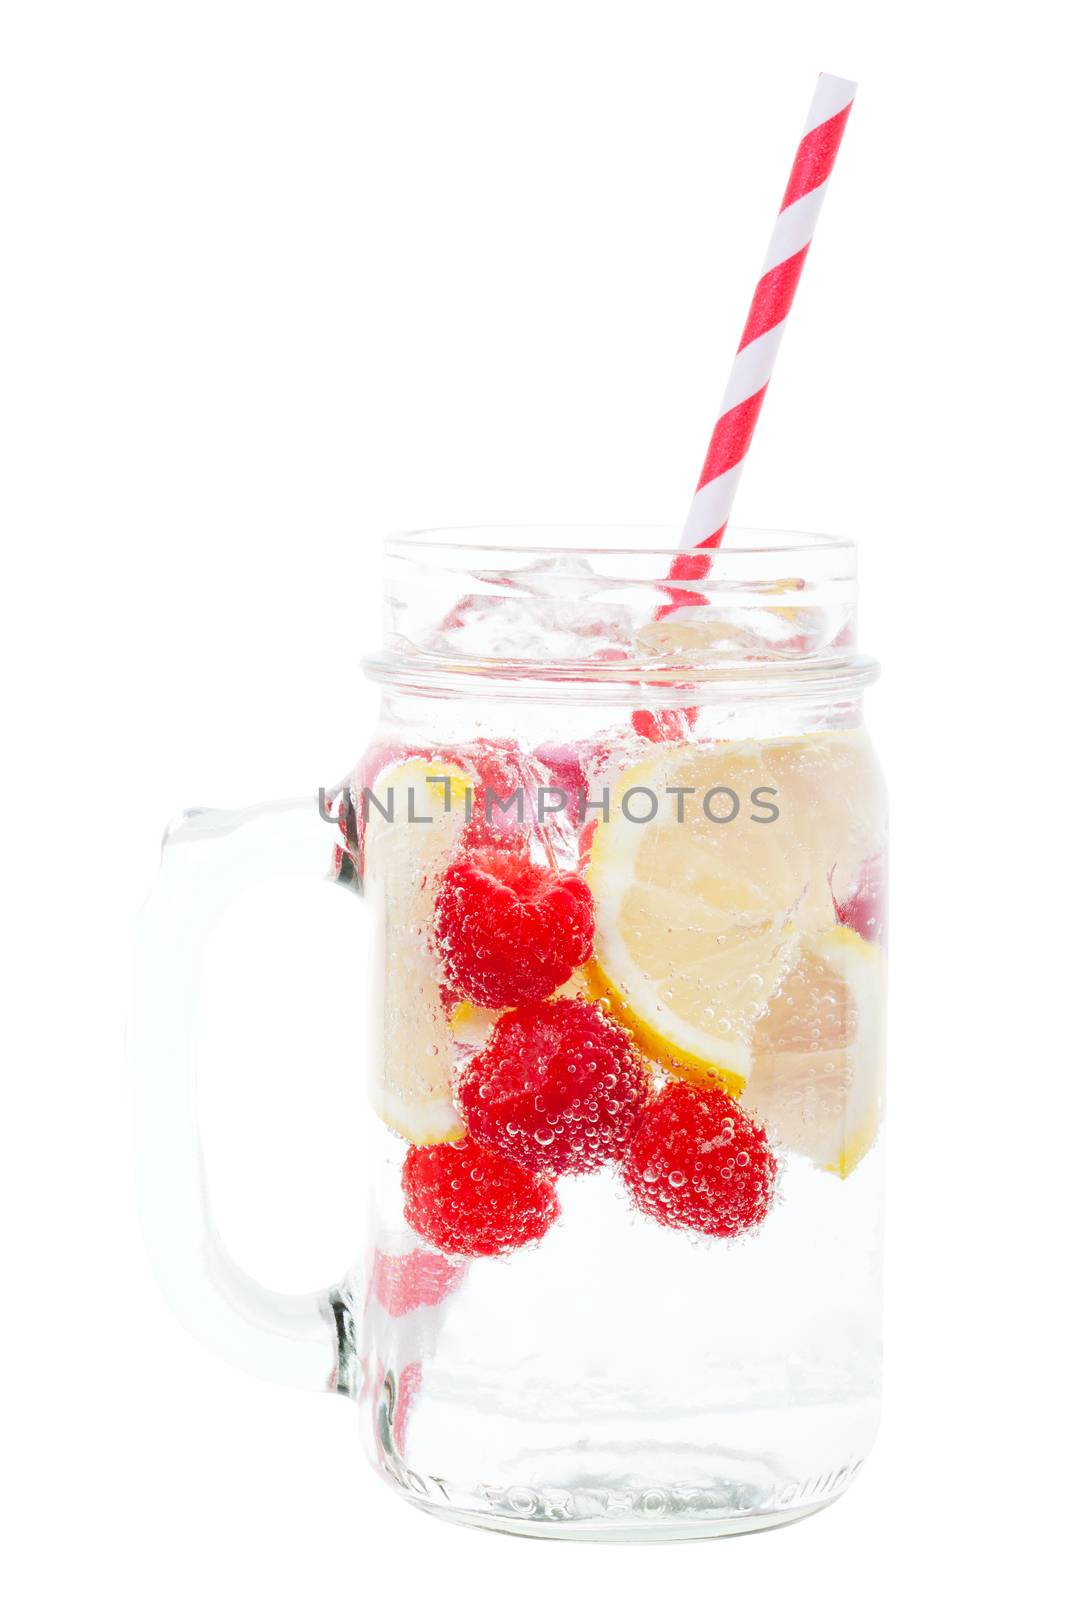 Ice cold sparkling water over ripe fresh fruit make for a healthy and thirst quenching beverage on a hot summer day.  Includes clipping path.